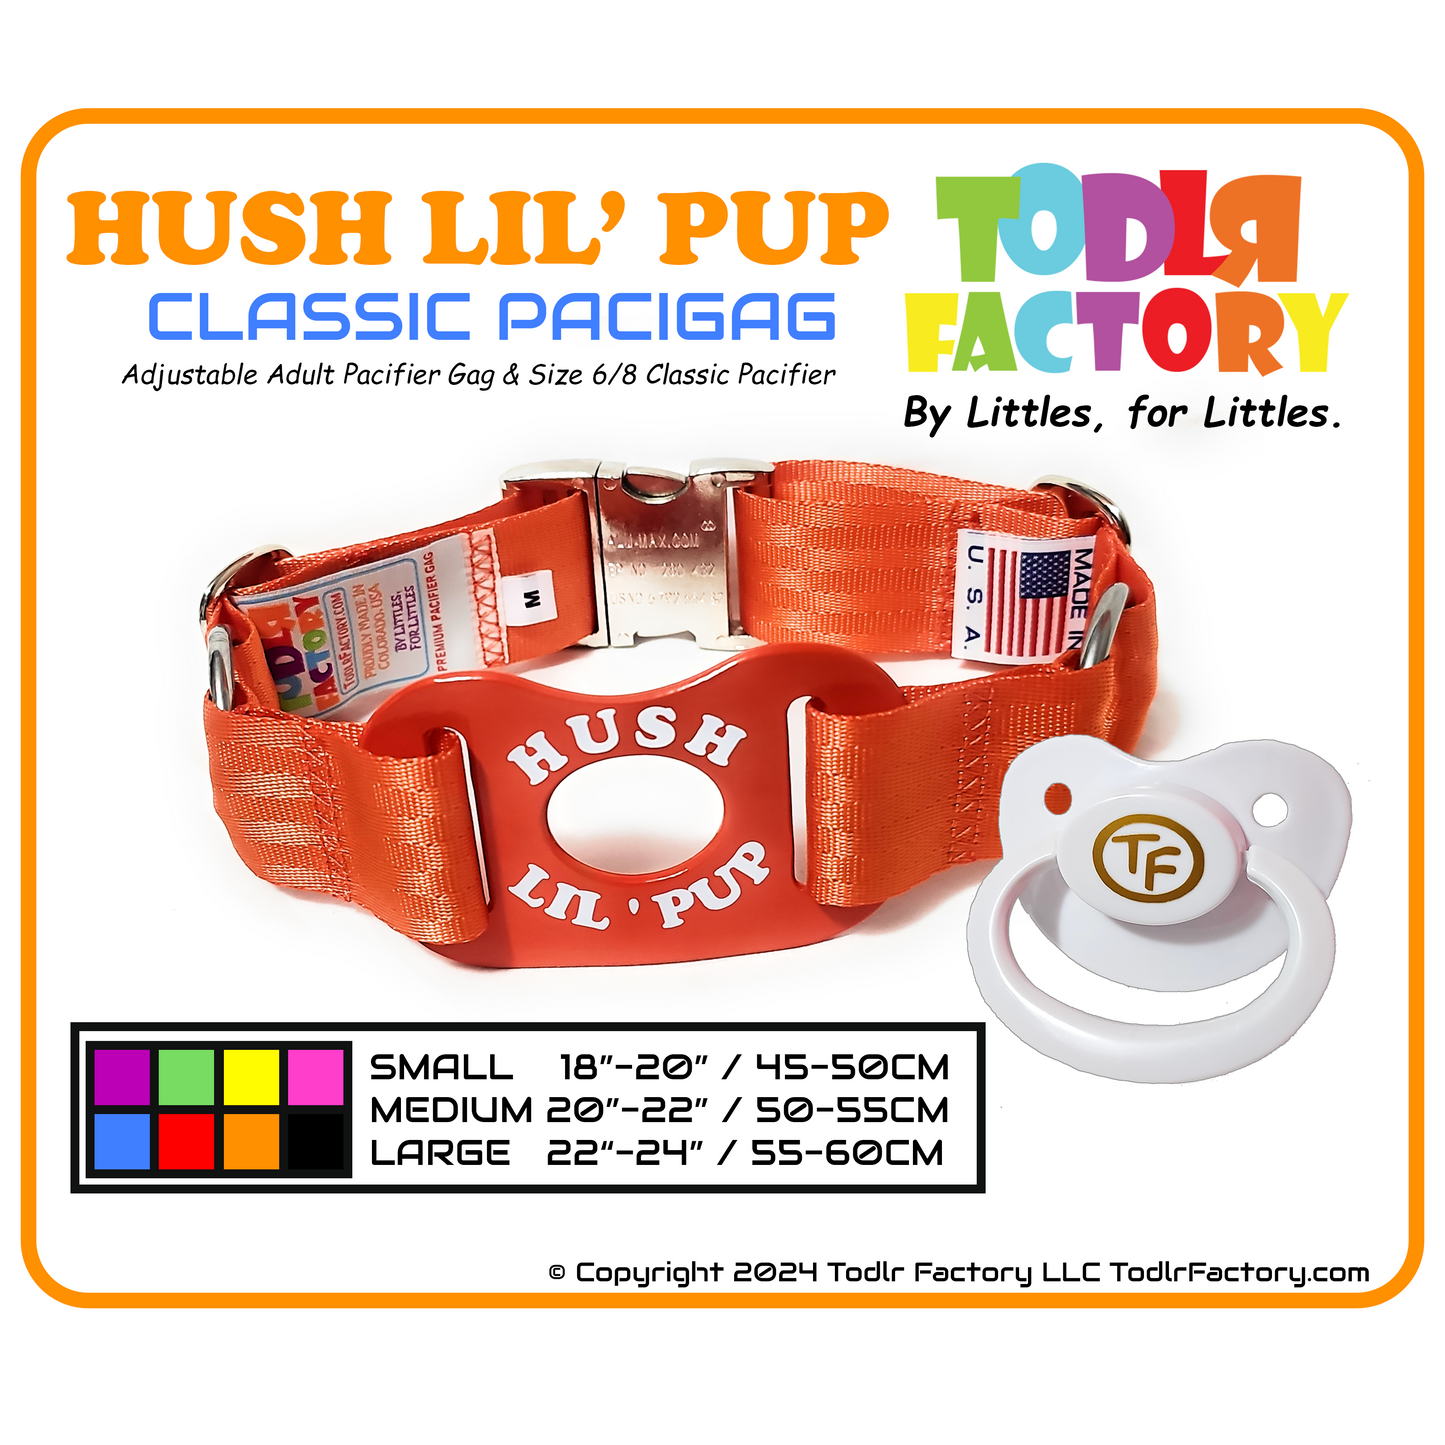 GEN 3 Todlr Factory Premium Adult Standard Classic Pacifier PaciGag Ageplay ABDL Little - "HUSH LIL' PUP"